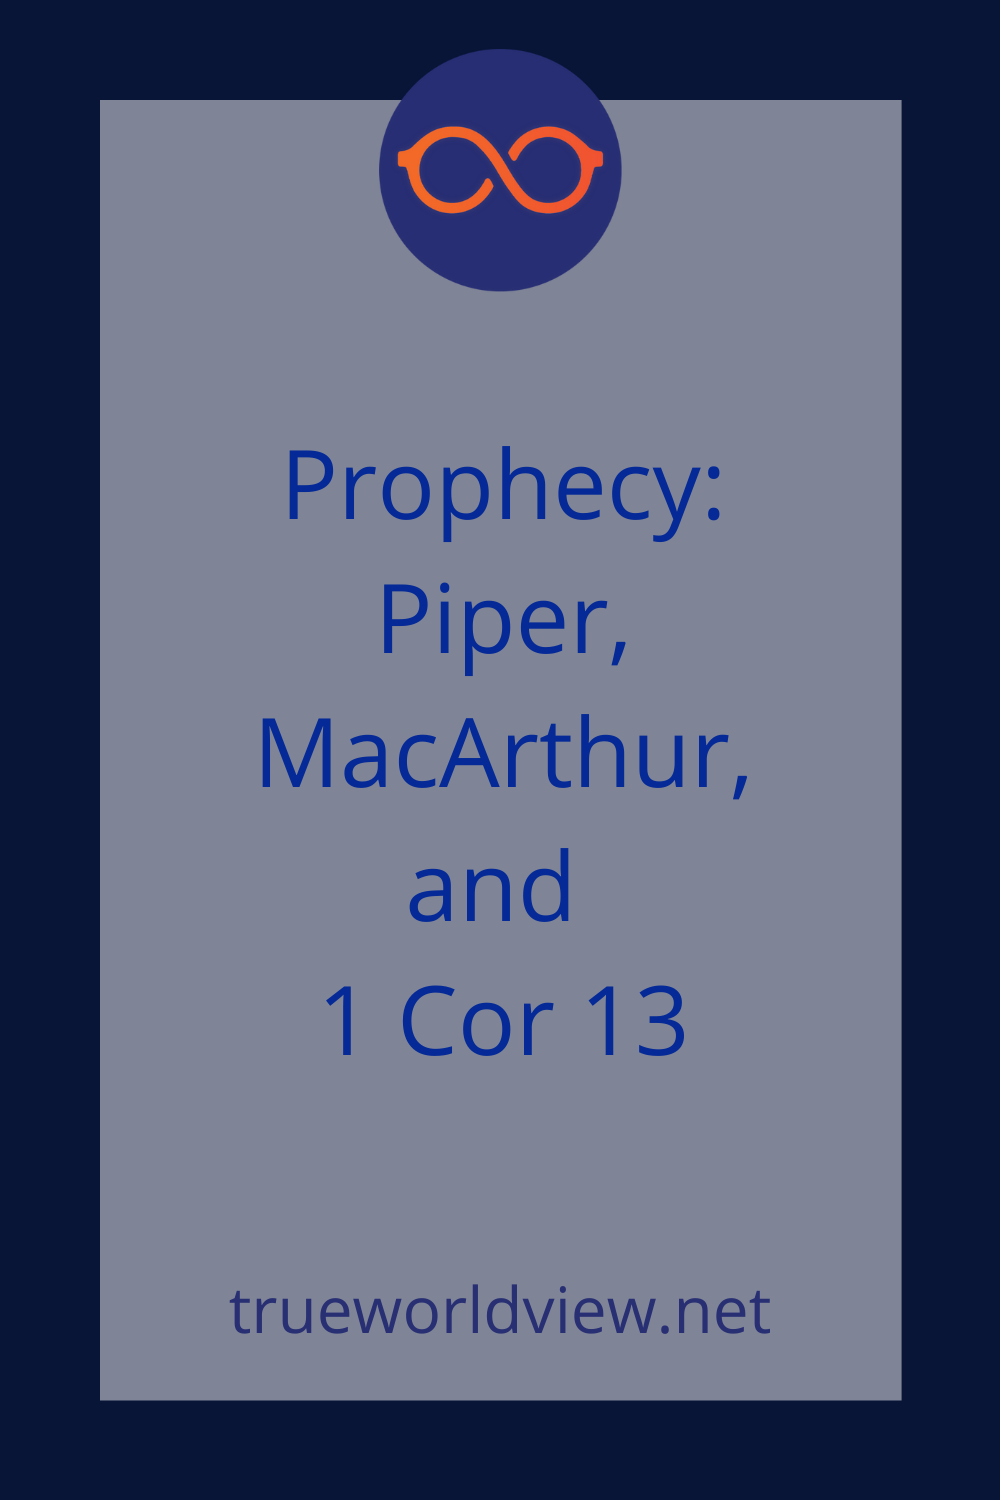 Prophecy: Piper, MacArthur, and 1 Cor 13